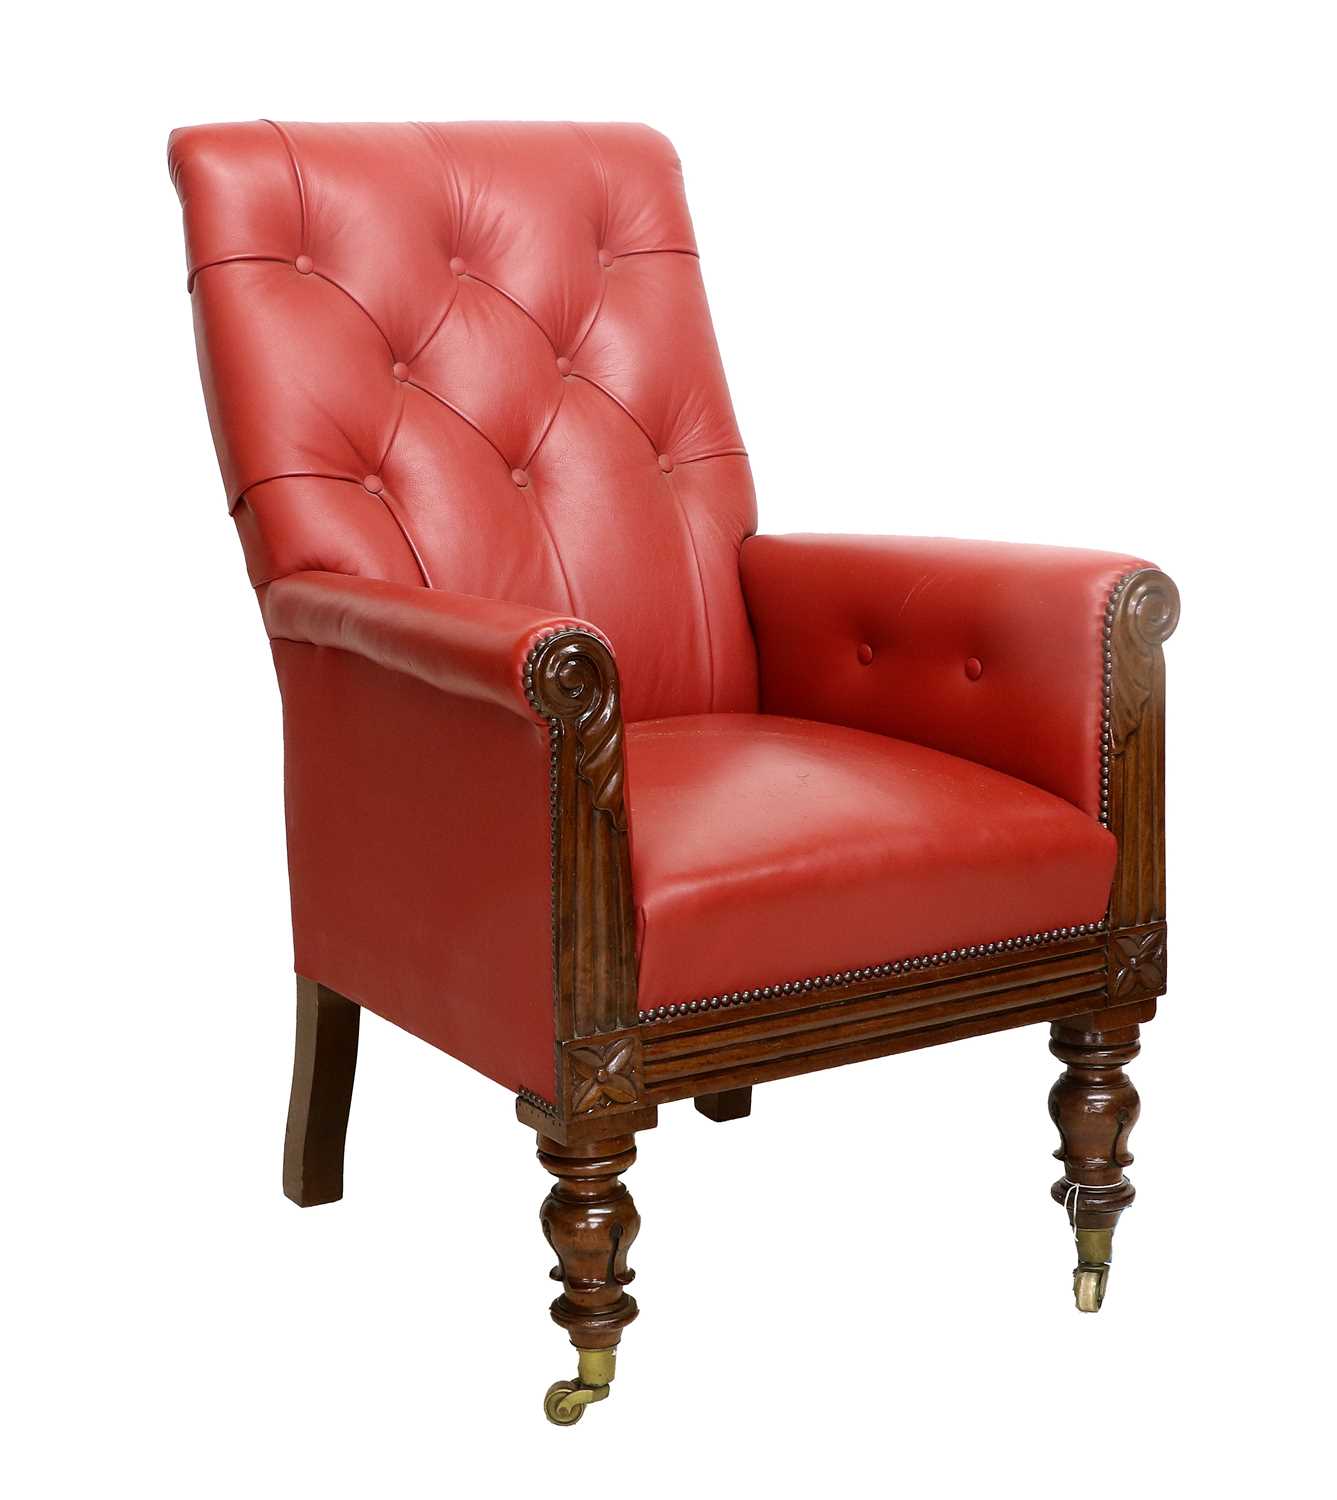 A William IV Carved Mahogany Library Armchair, 2nd quarter 19th century, recovered in close-nailed